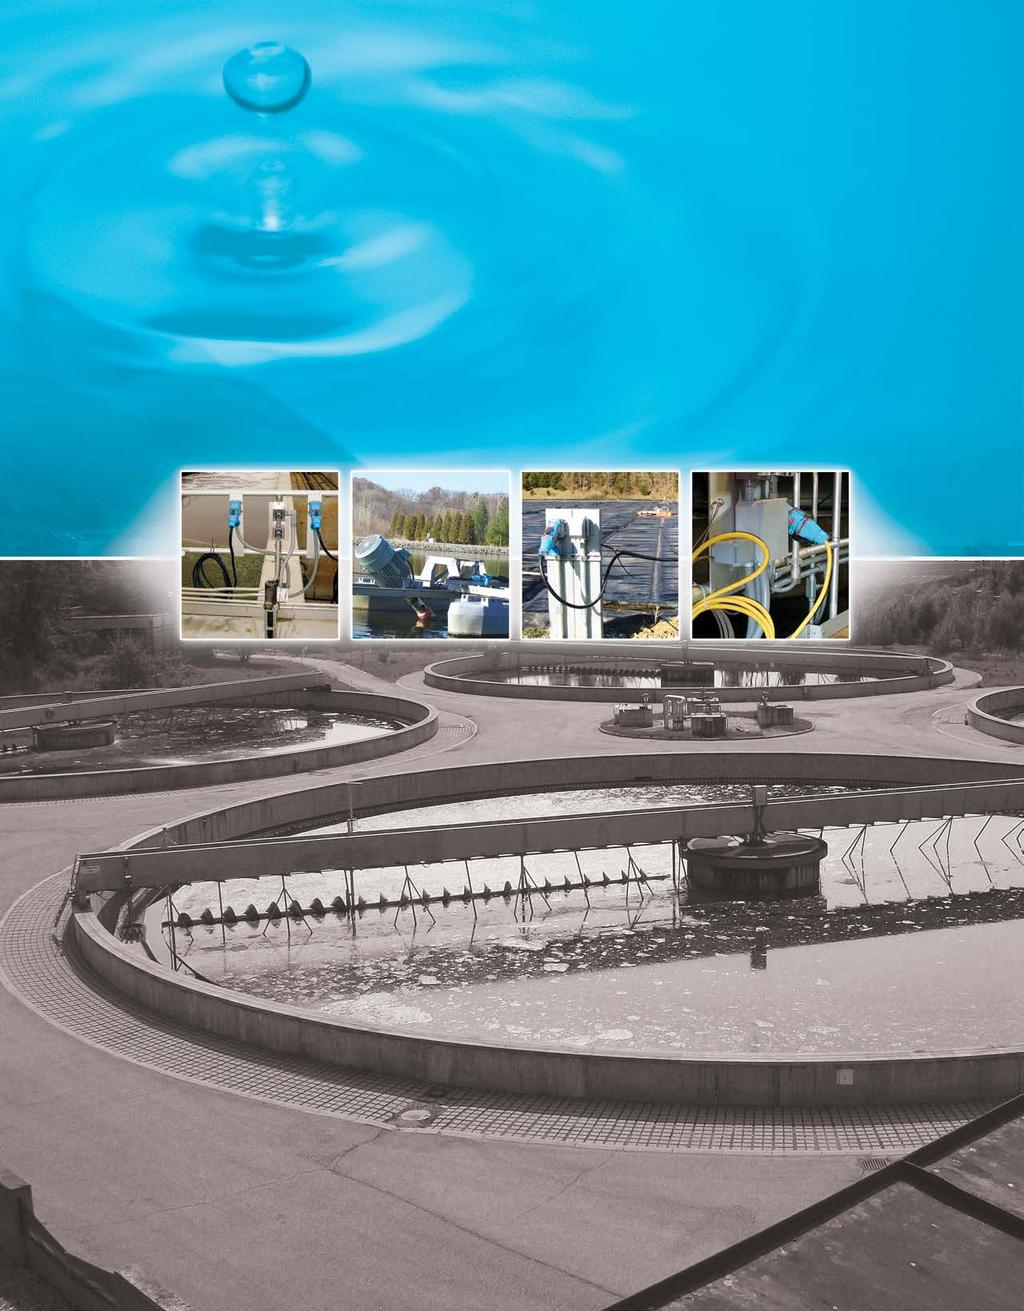 Wastewater Solutions Featuring Meltric s Switch-Rated Plugs, Receptacles